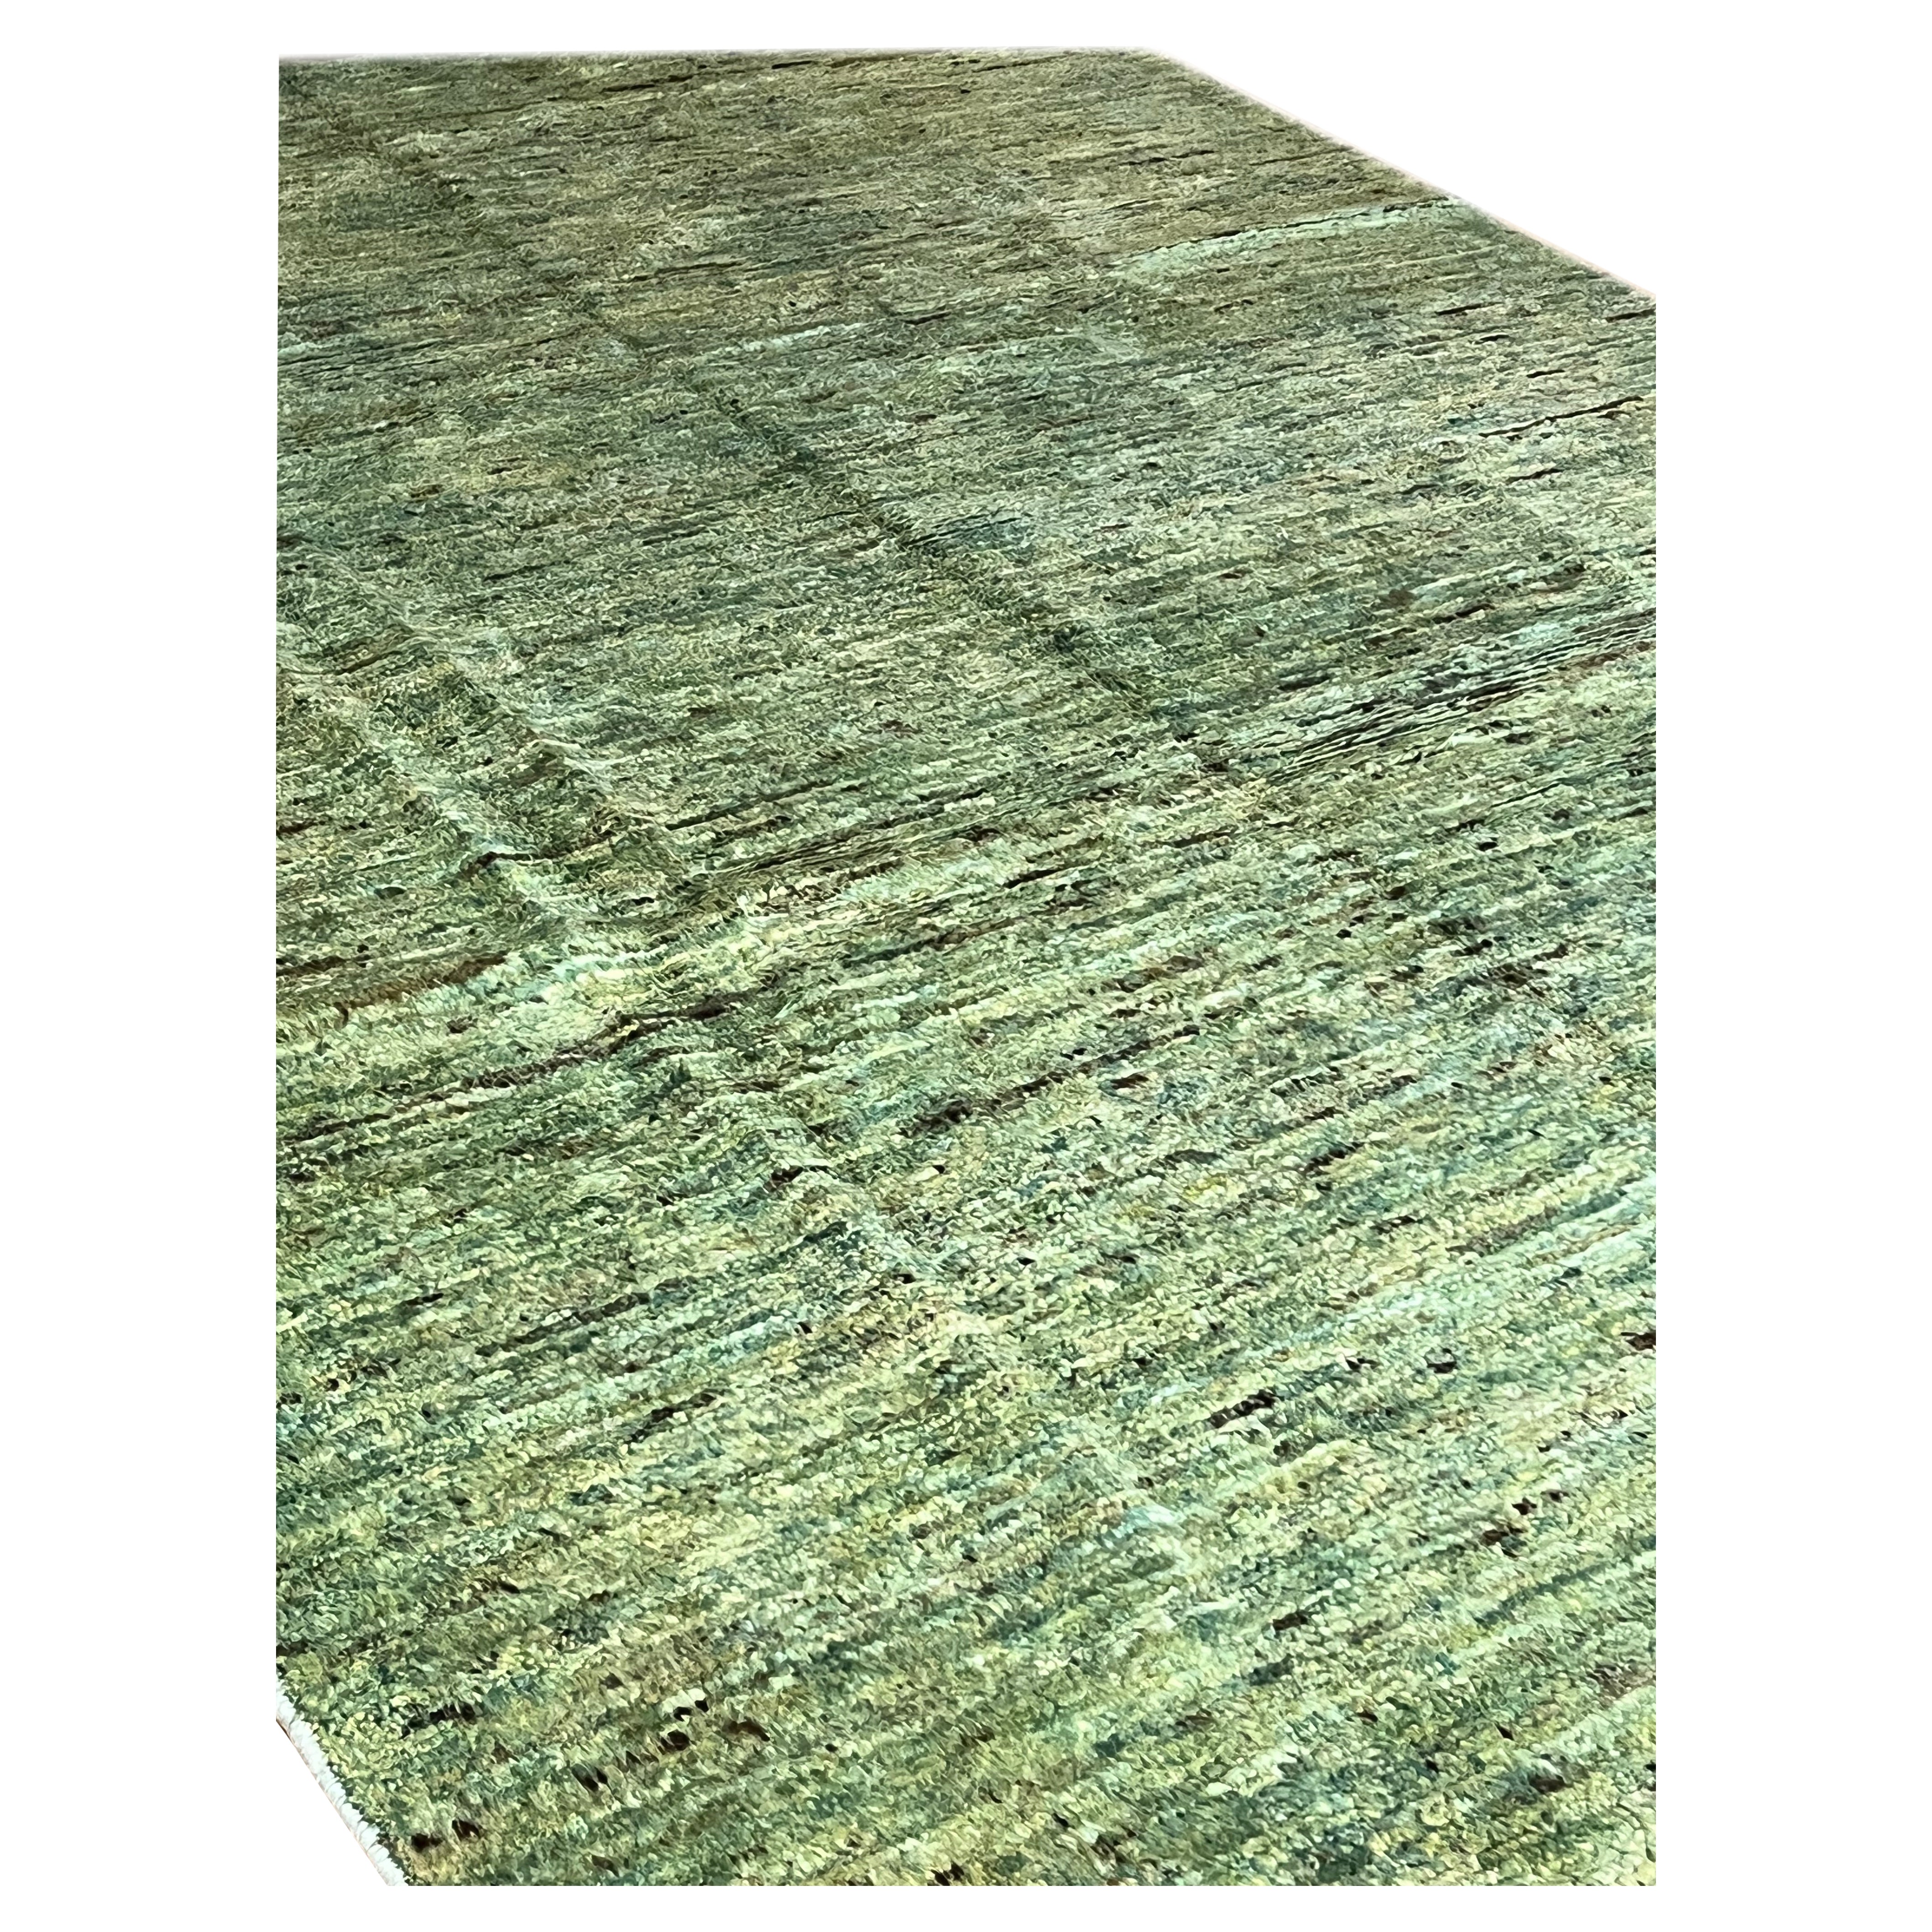 Monochromatic Carpet Shades of Green Meadw After Rain For Sale